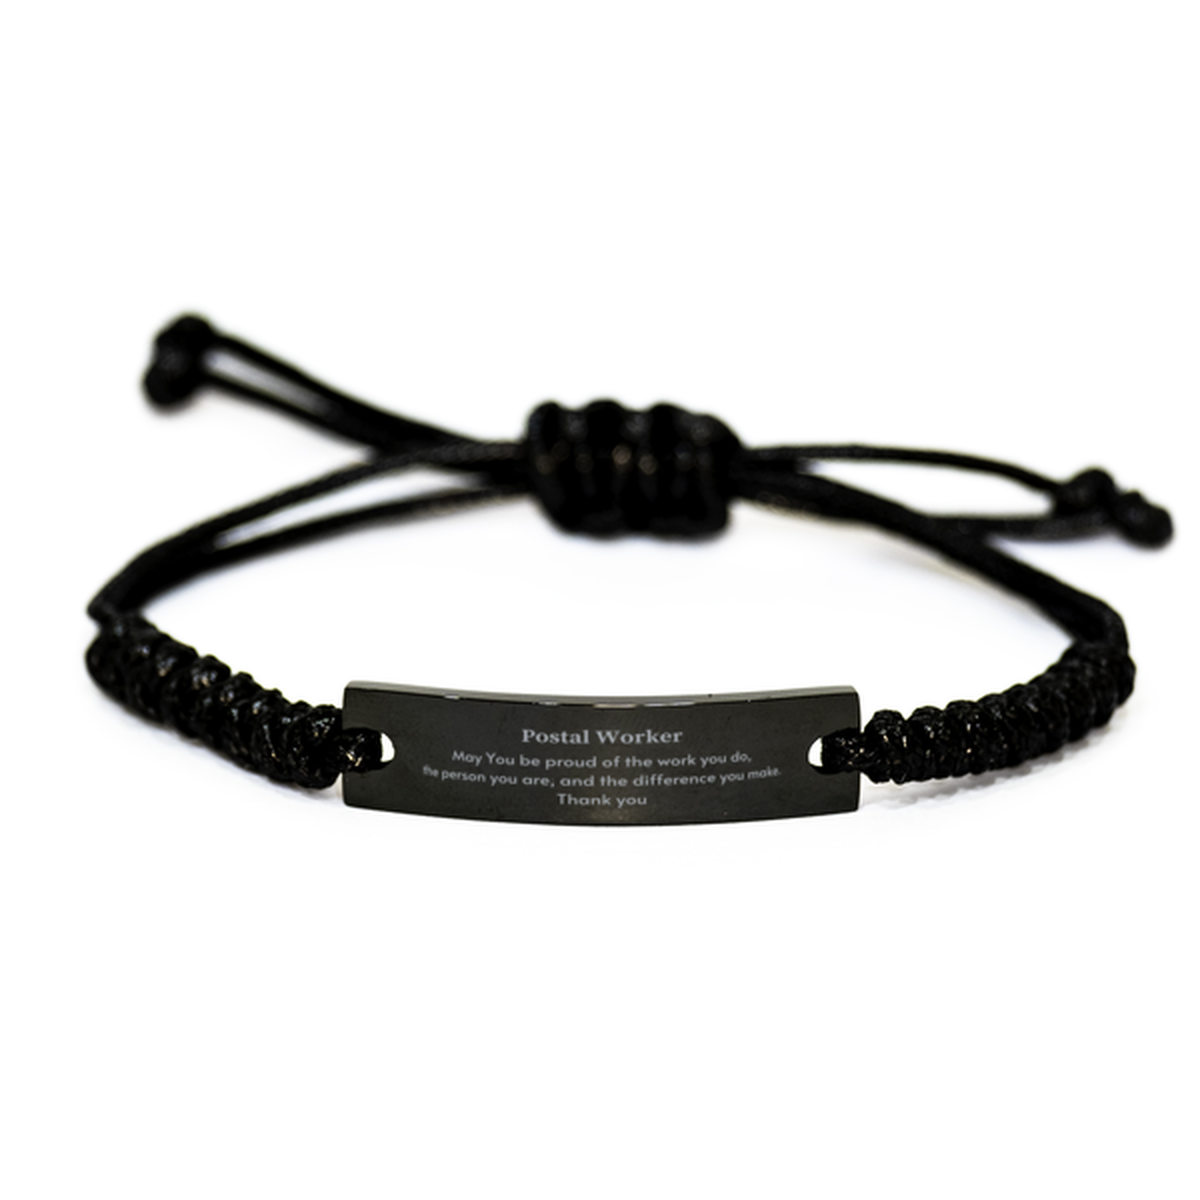 Heartwarming Black Rope Bracelet Retirement Coworkers Gifts for Postal Worker, Postal Worker May You be proud of the work you do, the person you are Gifts for Boss Men Women Friends